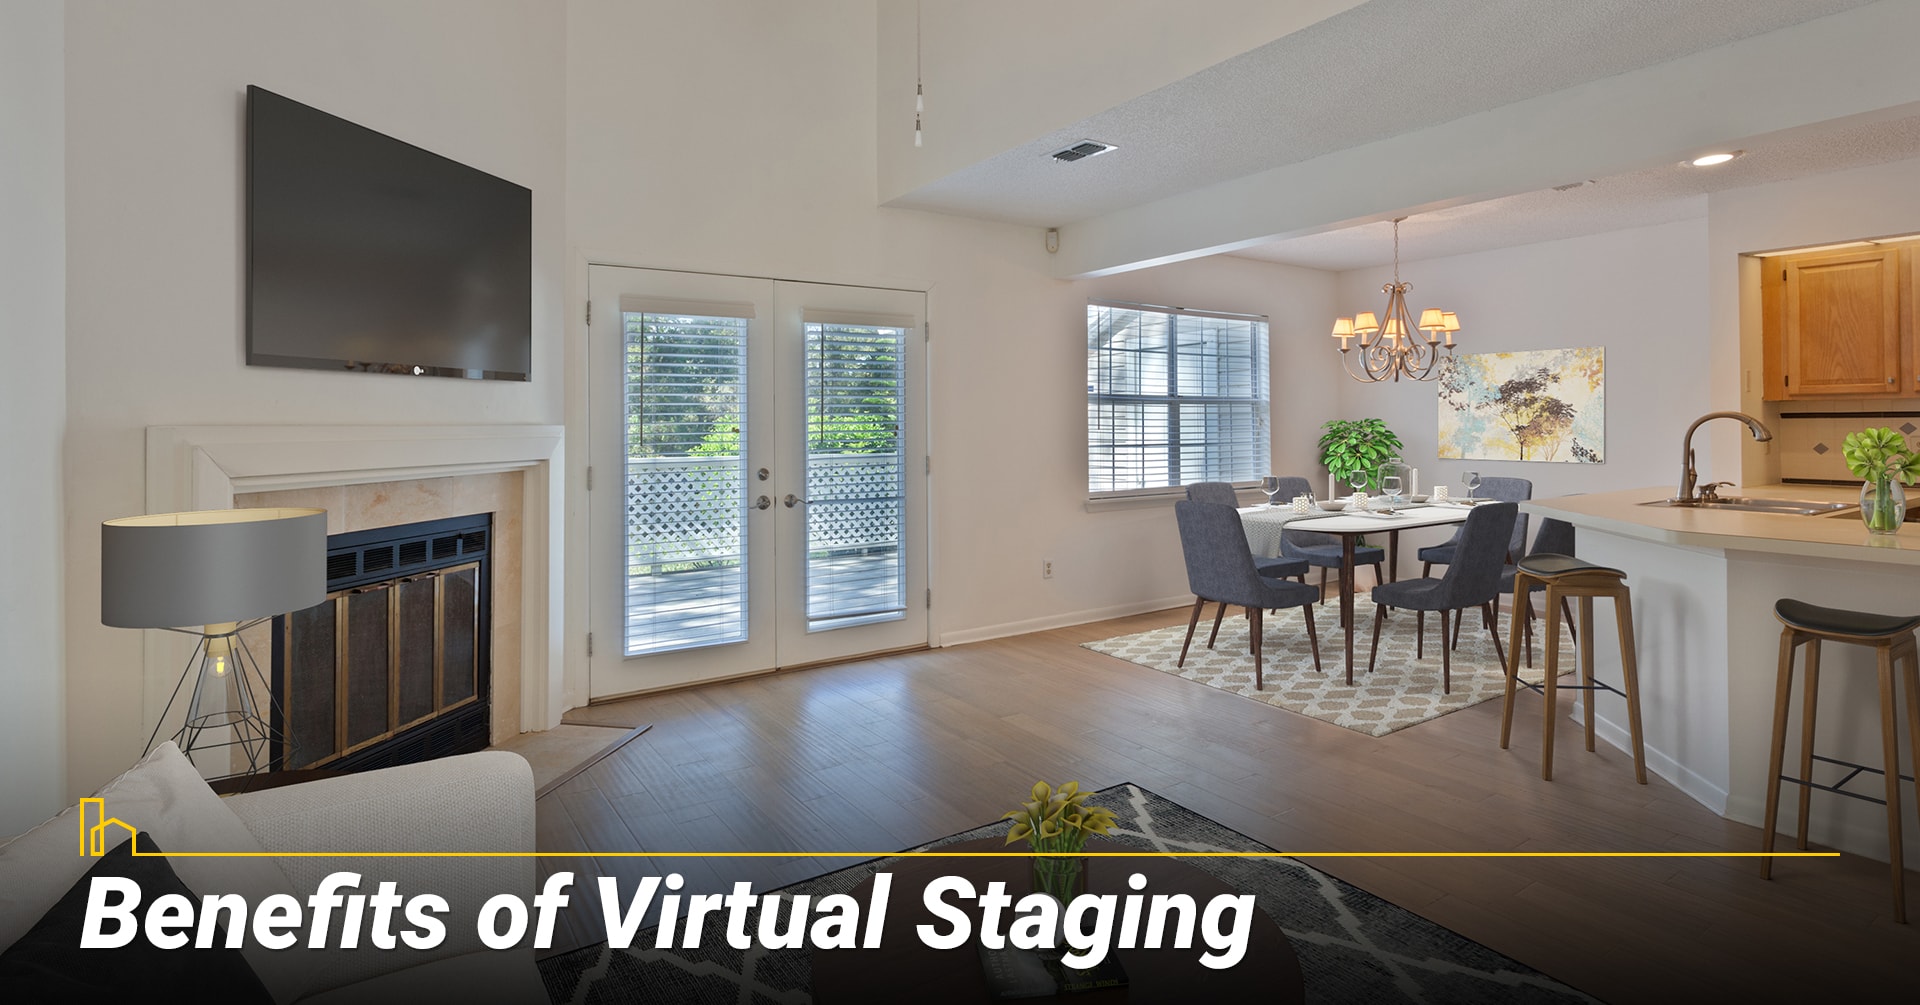 Enhancing Your Home's Appeal: The Technology Behind Virtual Staging